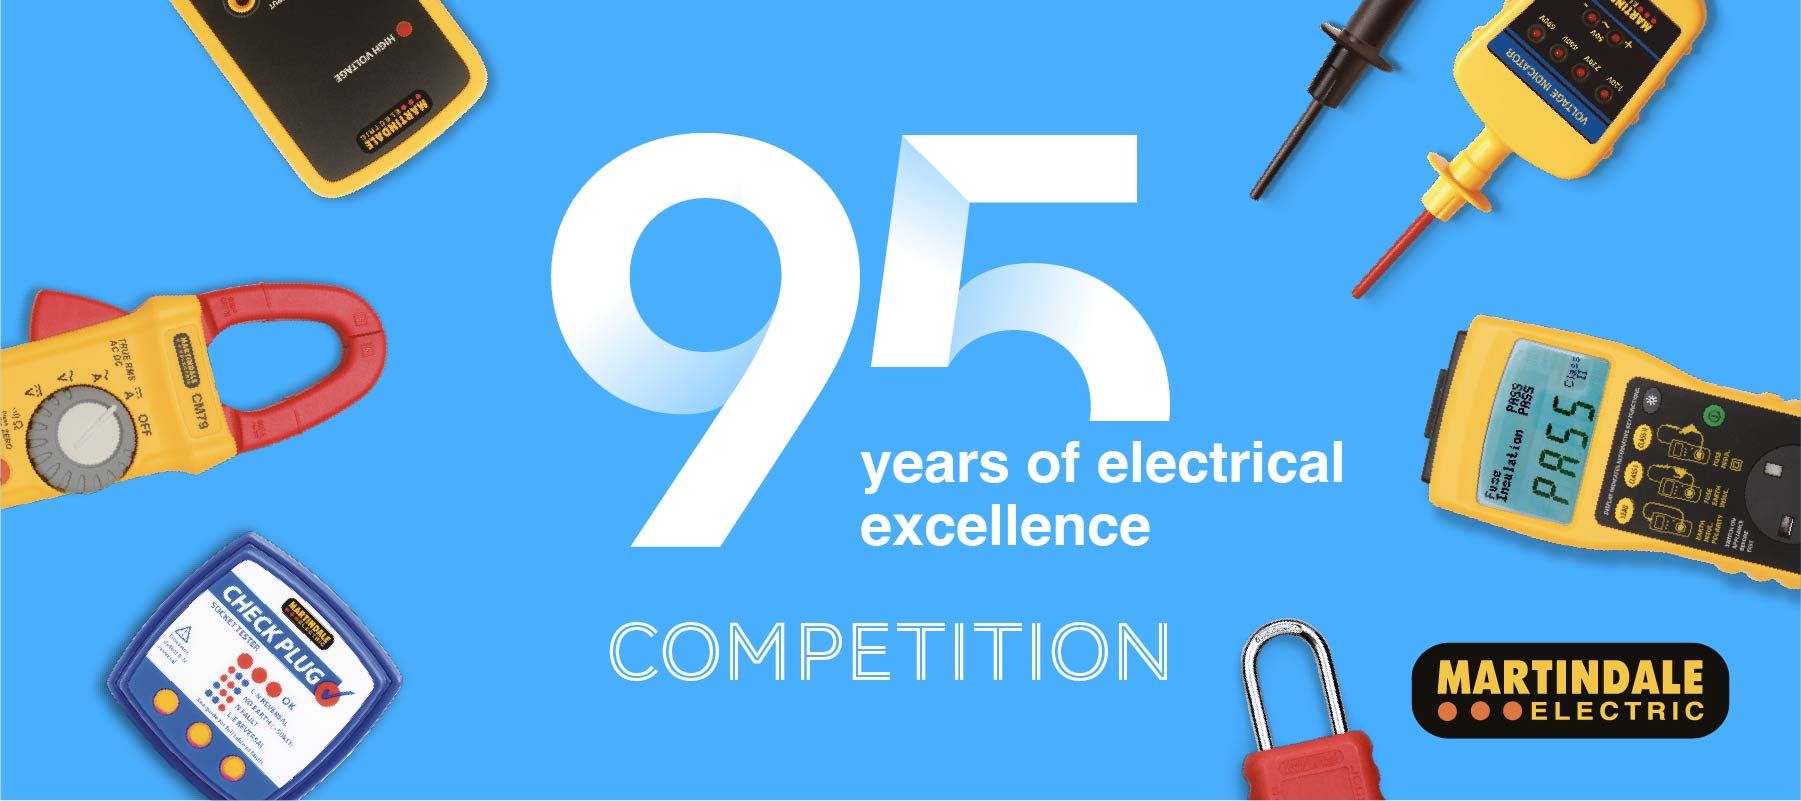 Martindale Electric launches Spot the Difference competition